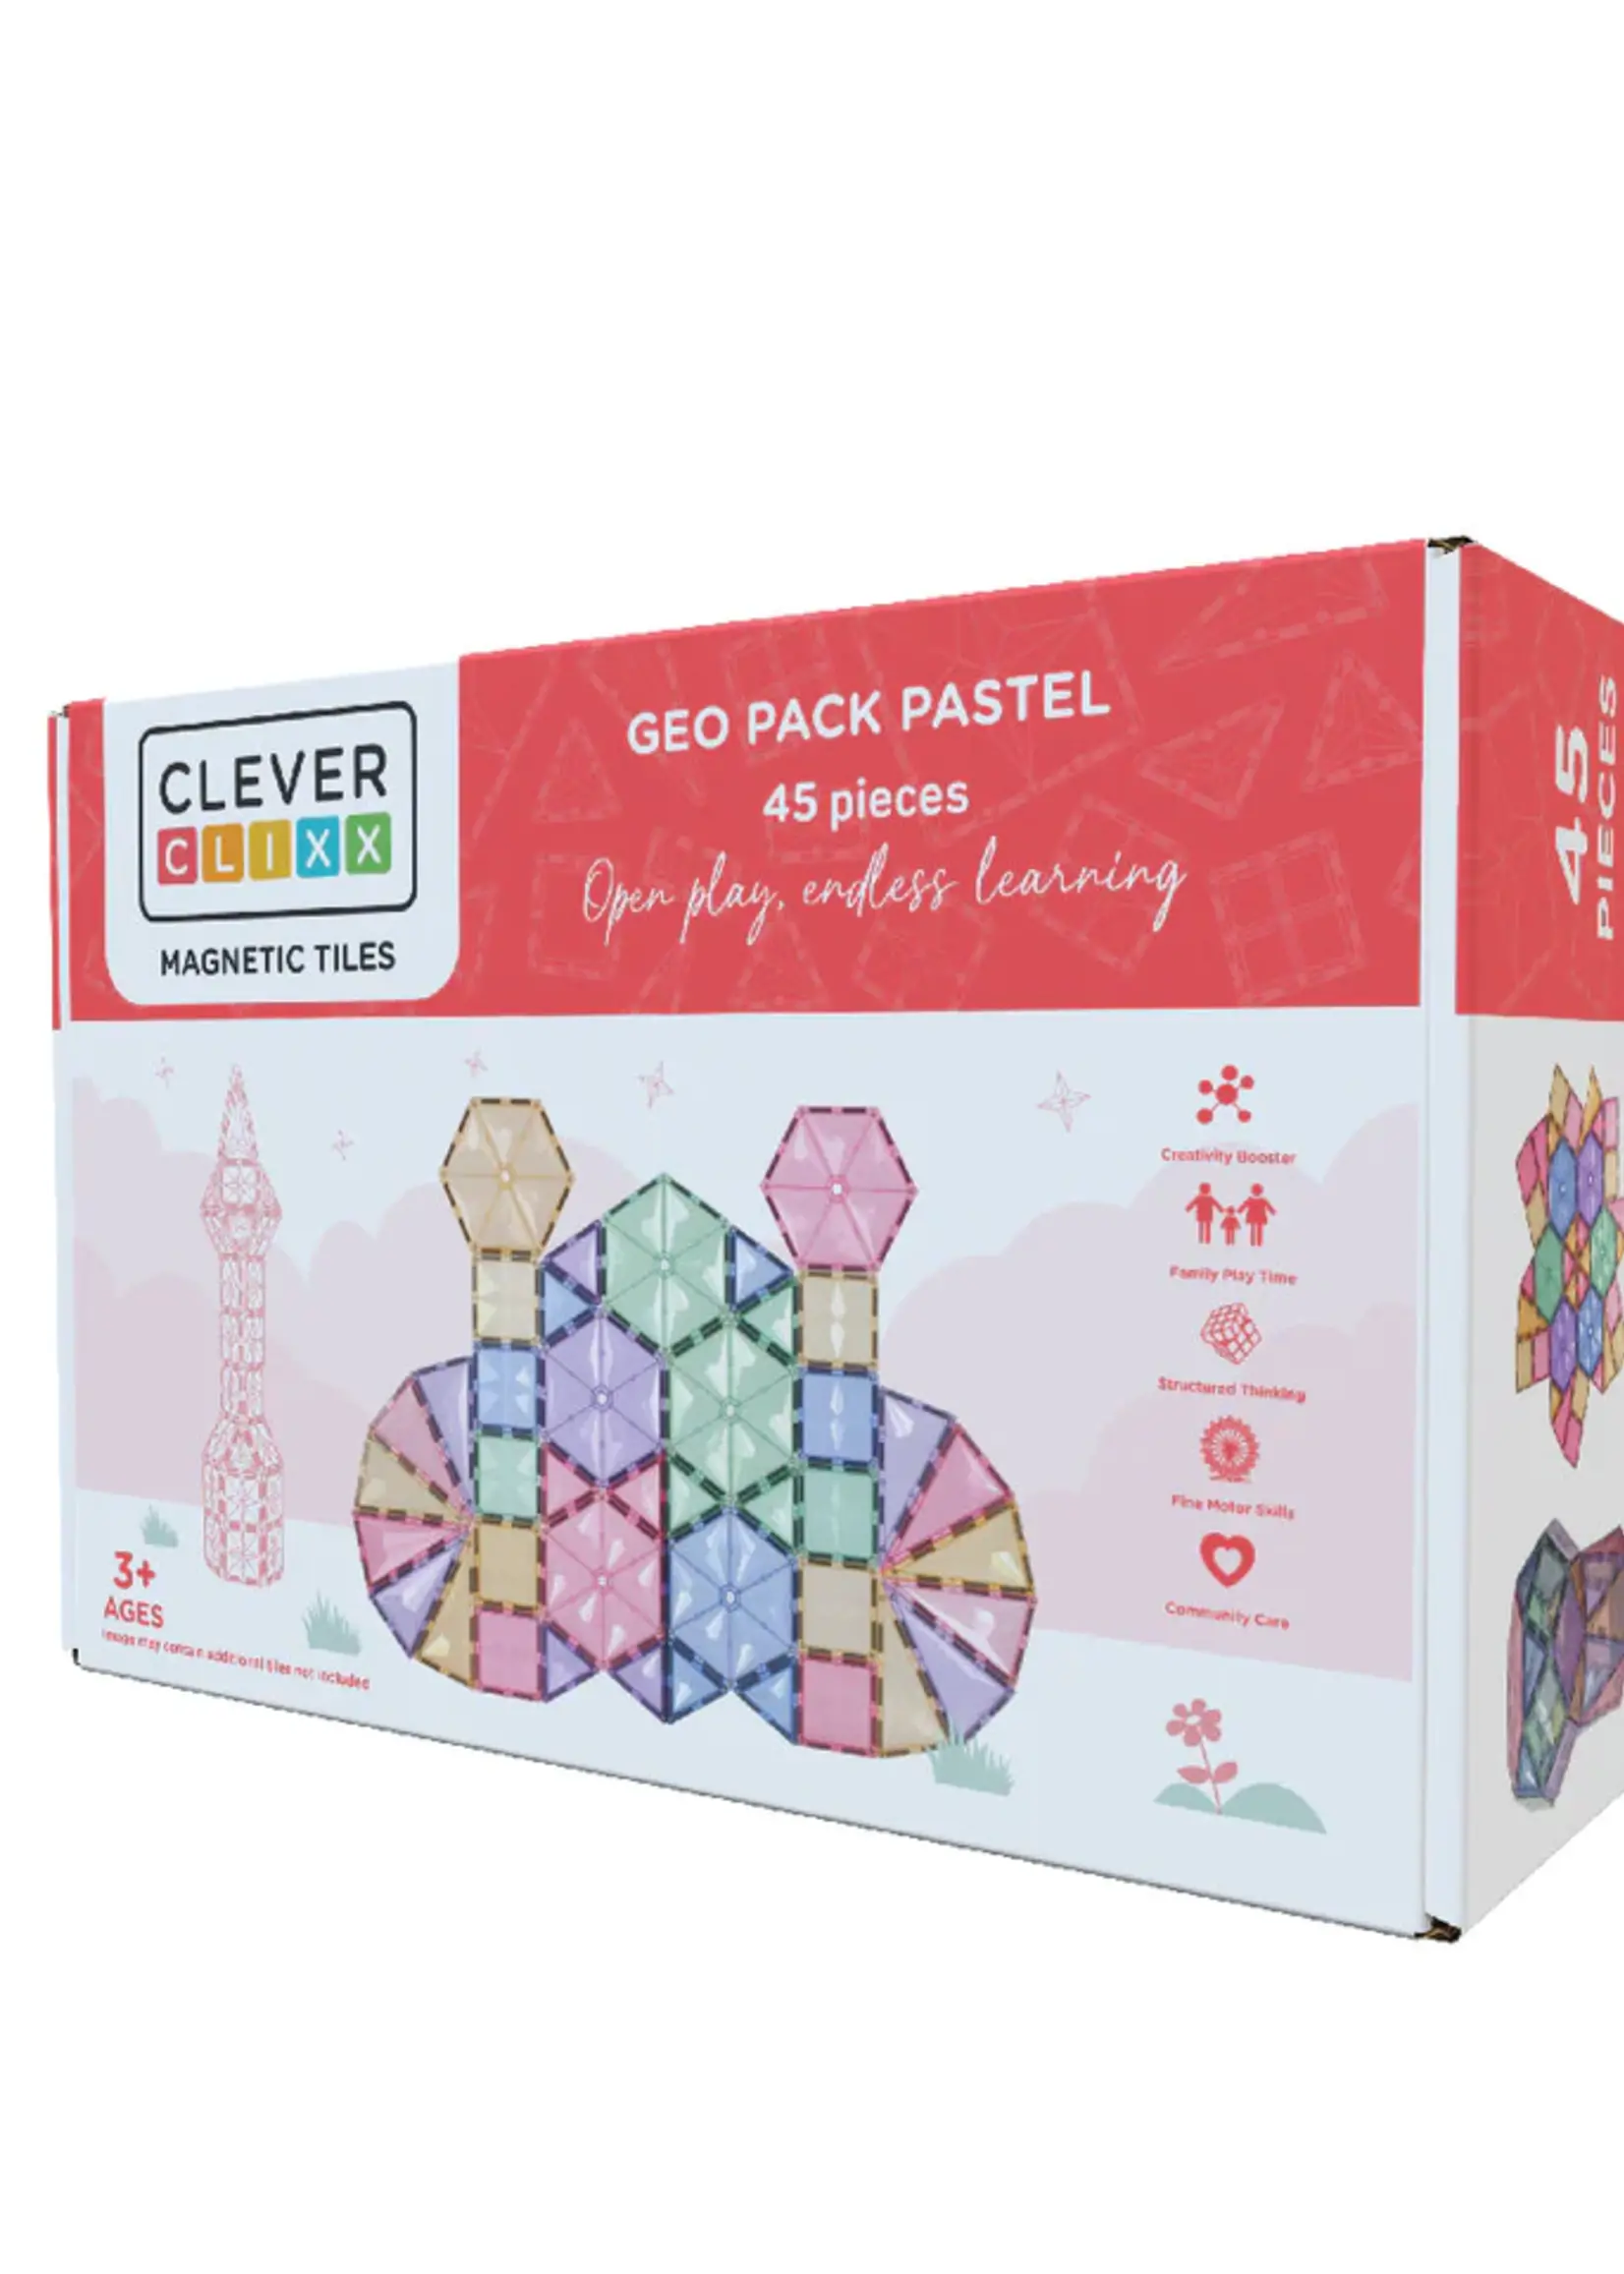 Cleverclixx Cleverclixx | Geo Pack Pastel - 45 pieces